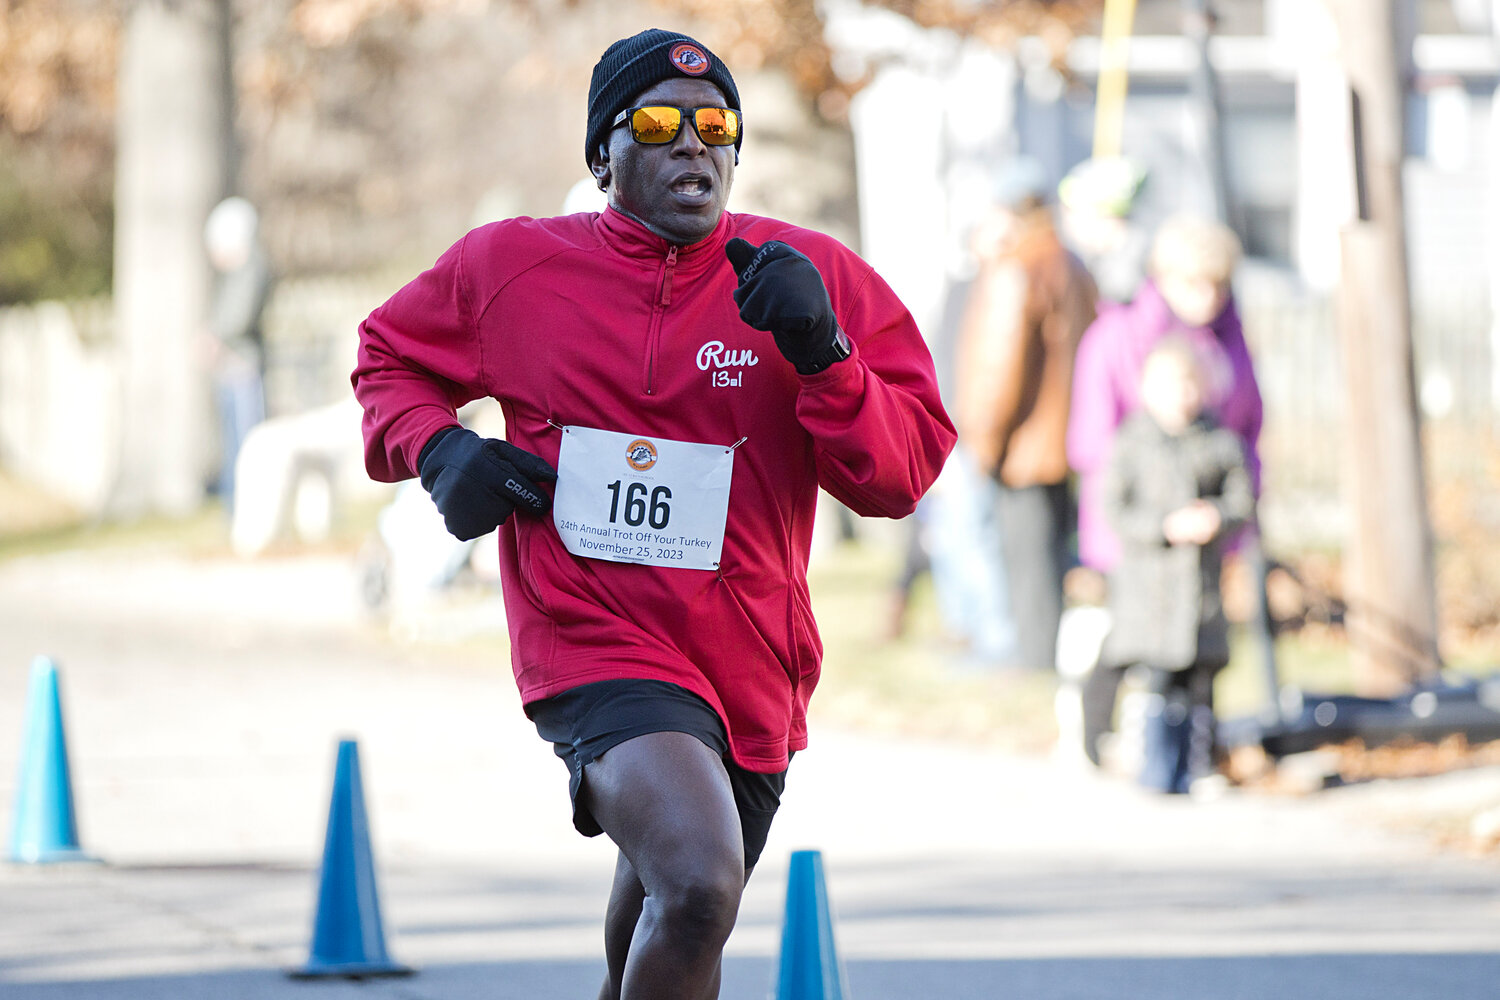 Dominic Herard, of Cranston, powers toward the finish line at the 24th annual Trot Off Your Turkey 5K.